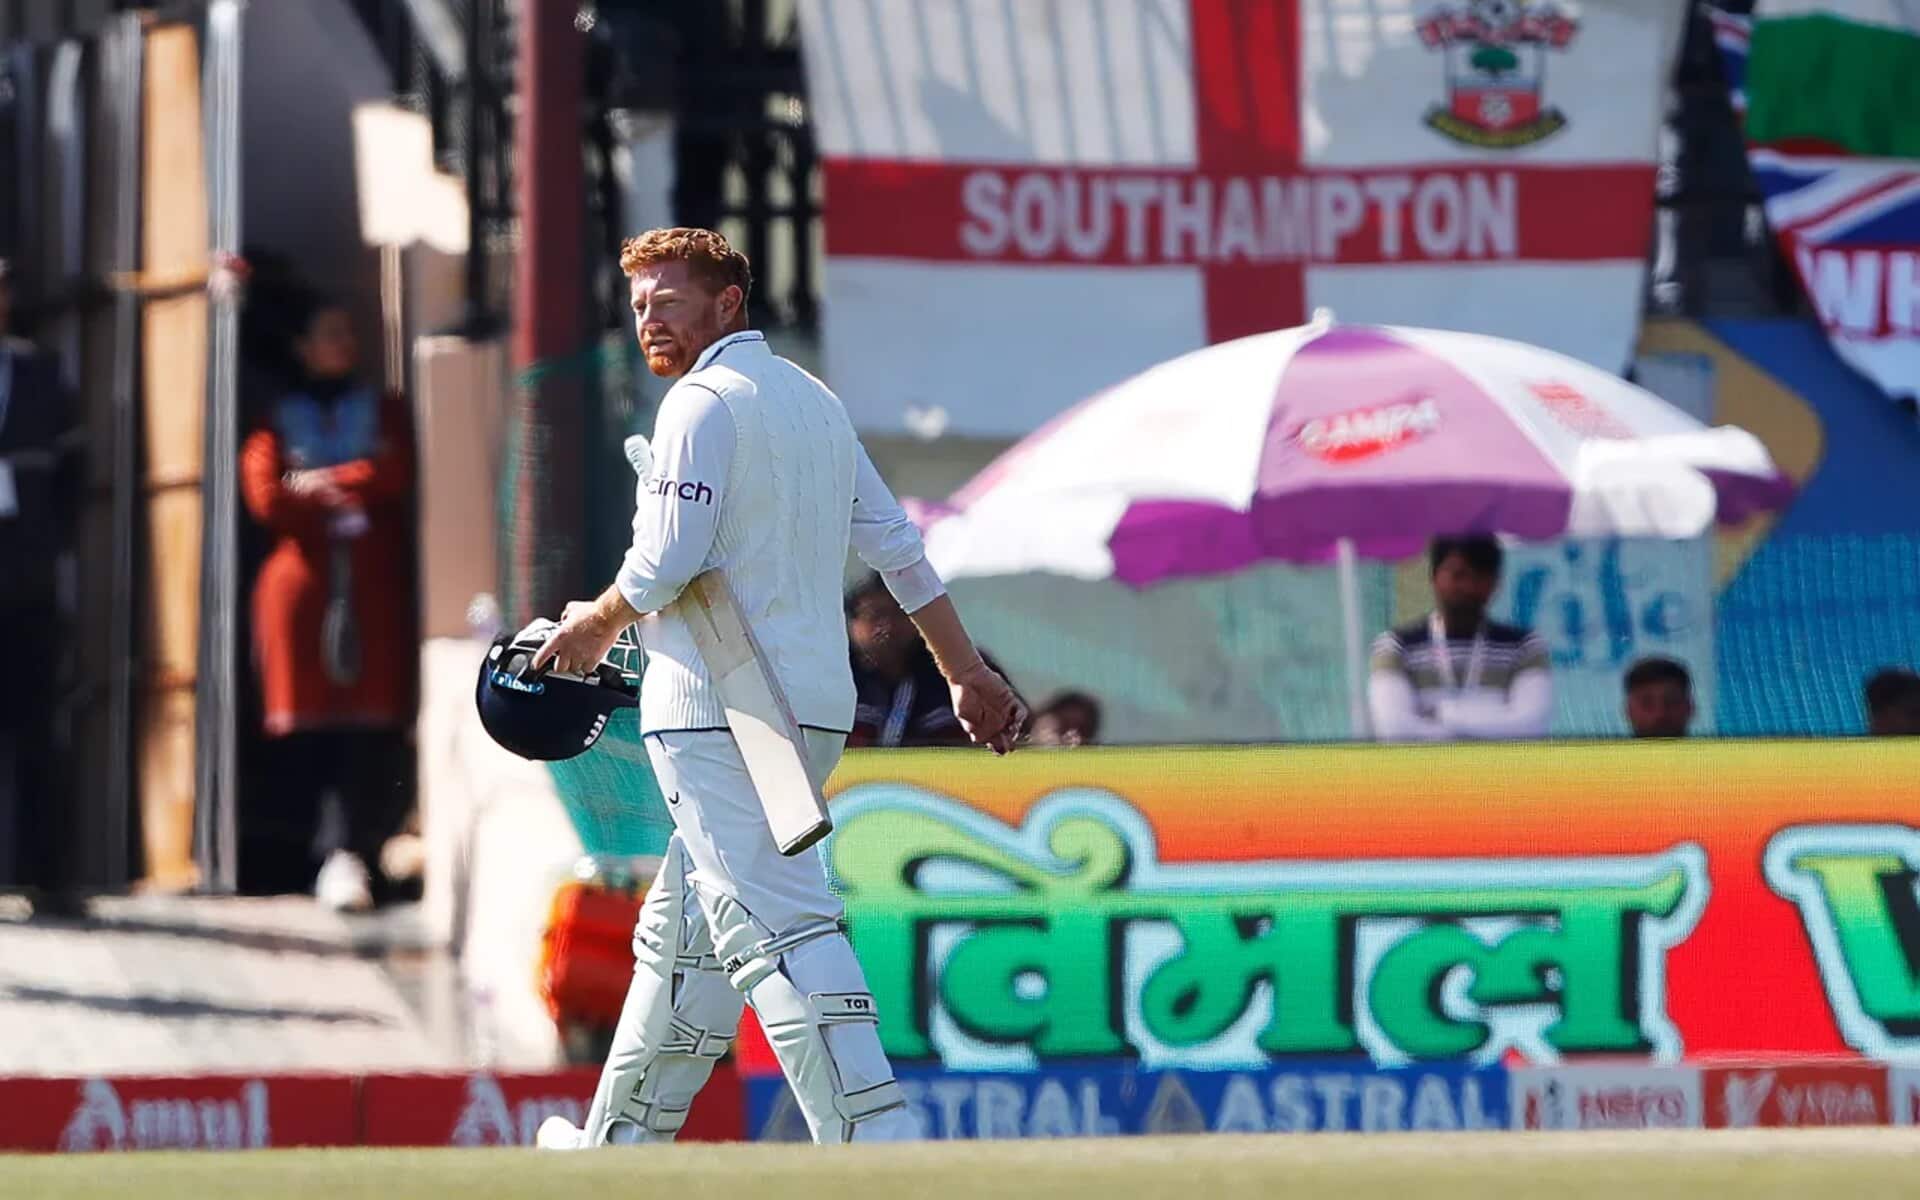 Jonny Bairstow departs after playing a cameo (Source: BCCI)